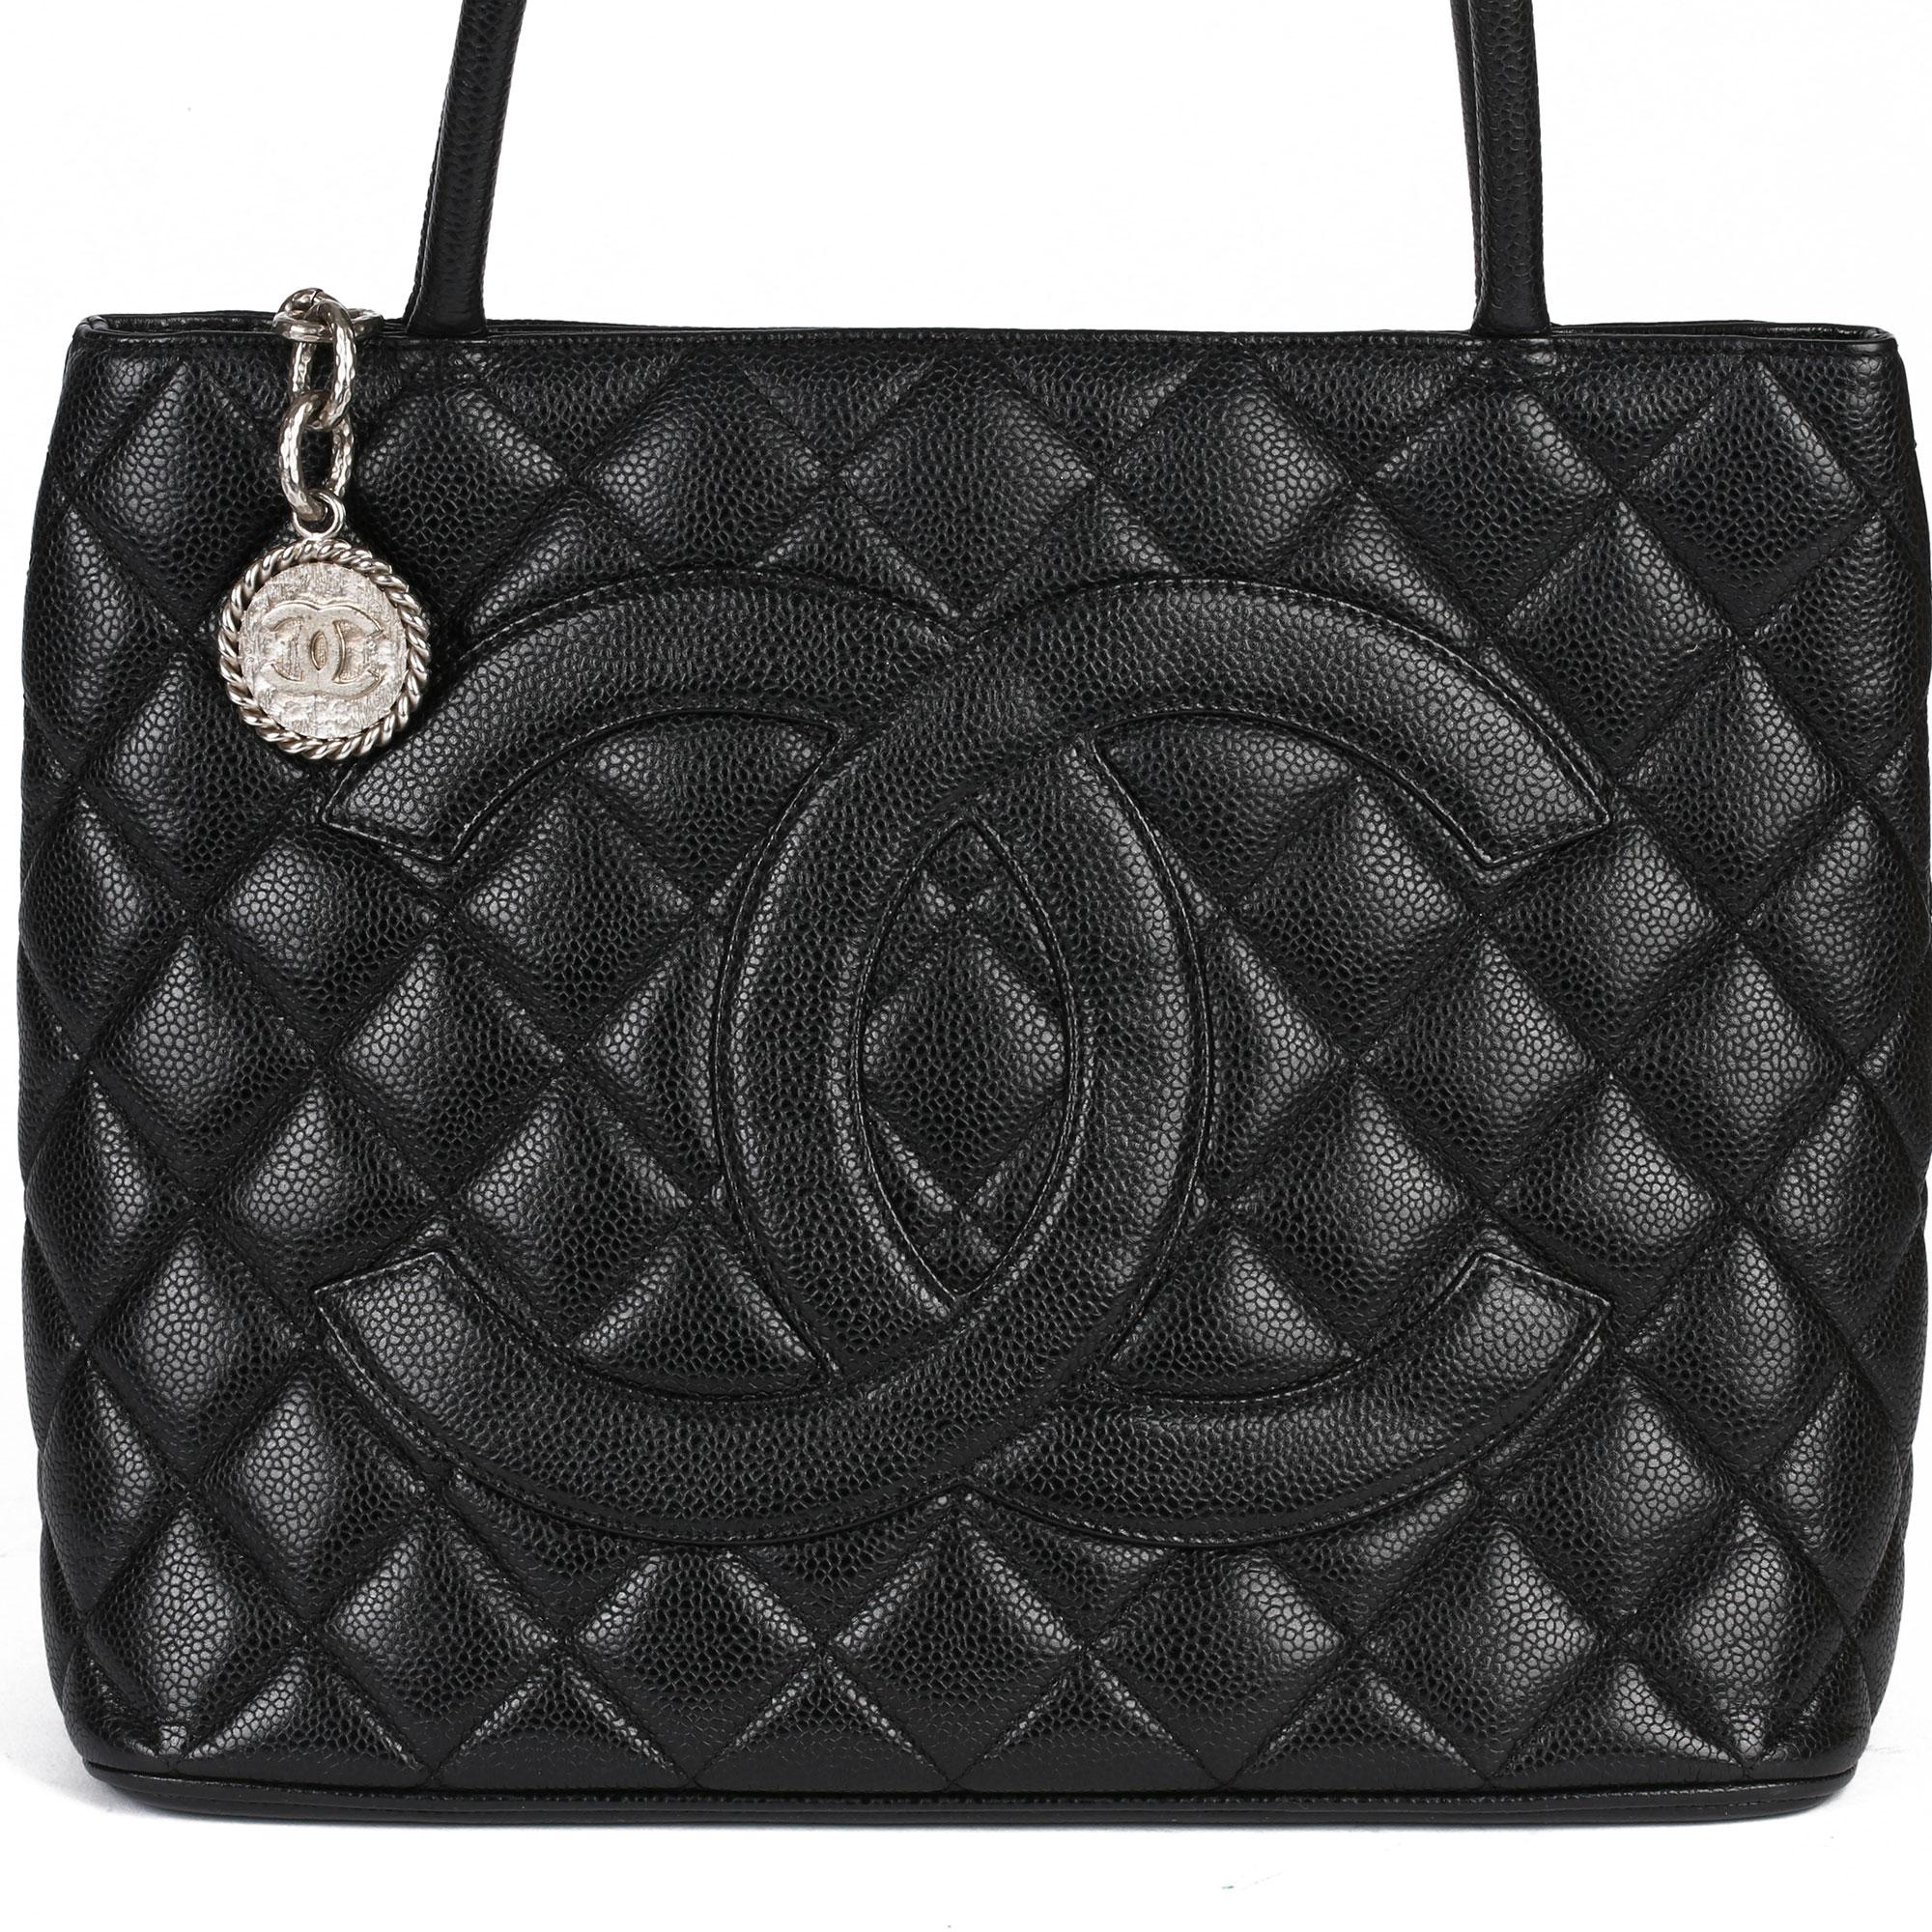 2002 Chanel Black Quilted Caviar Leather Vintage Medallion Tote  4